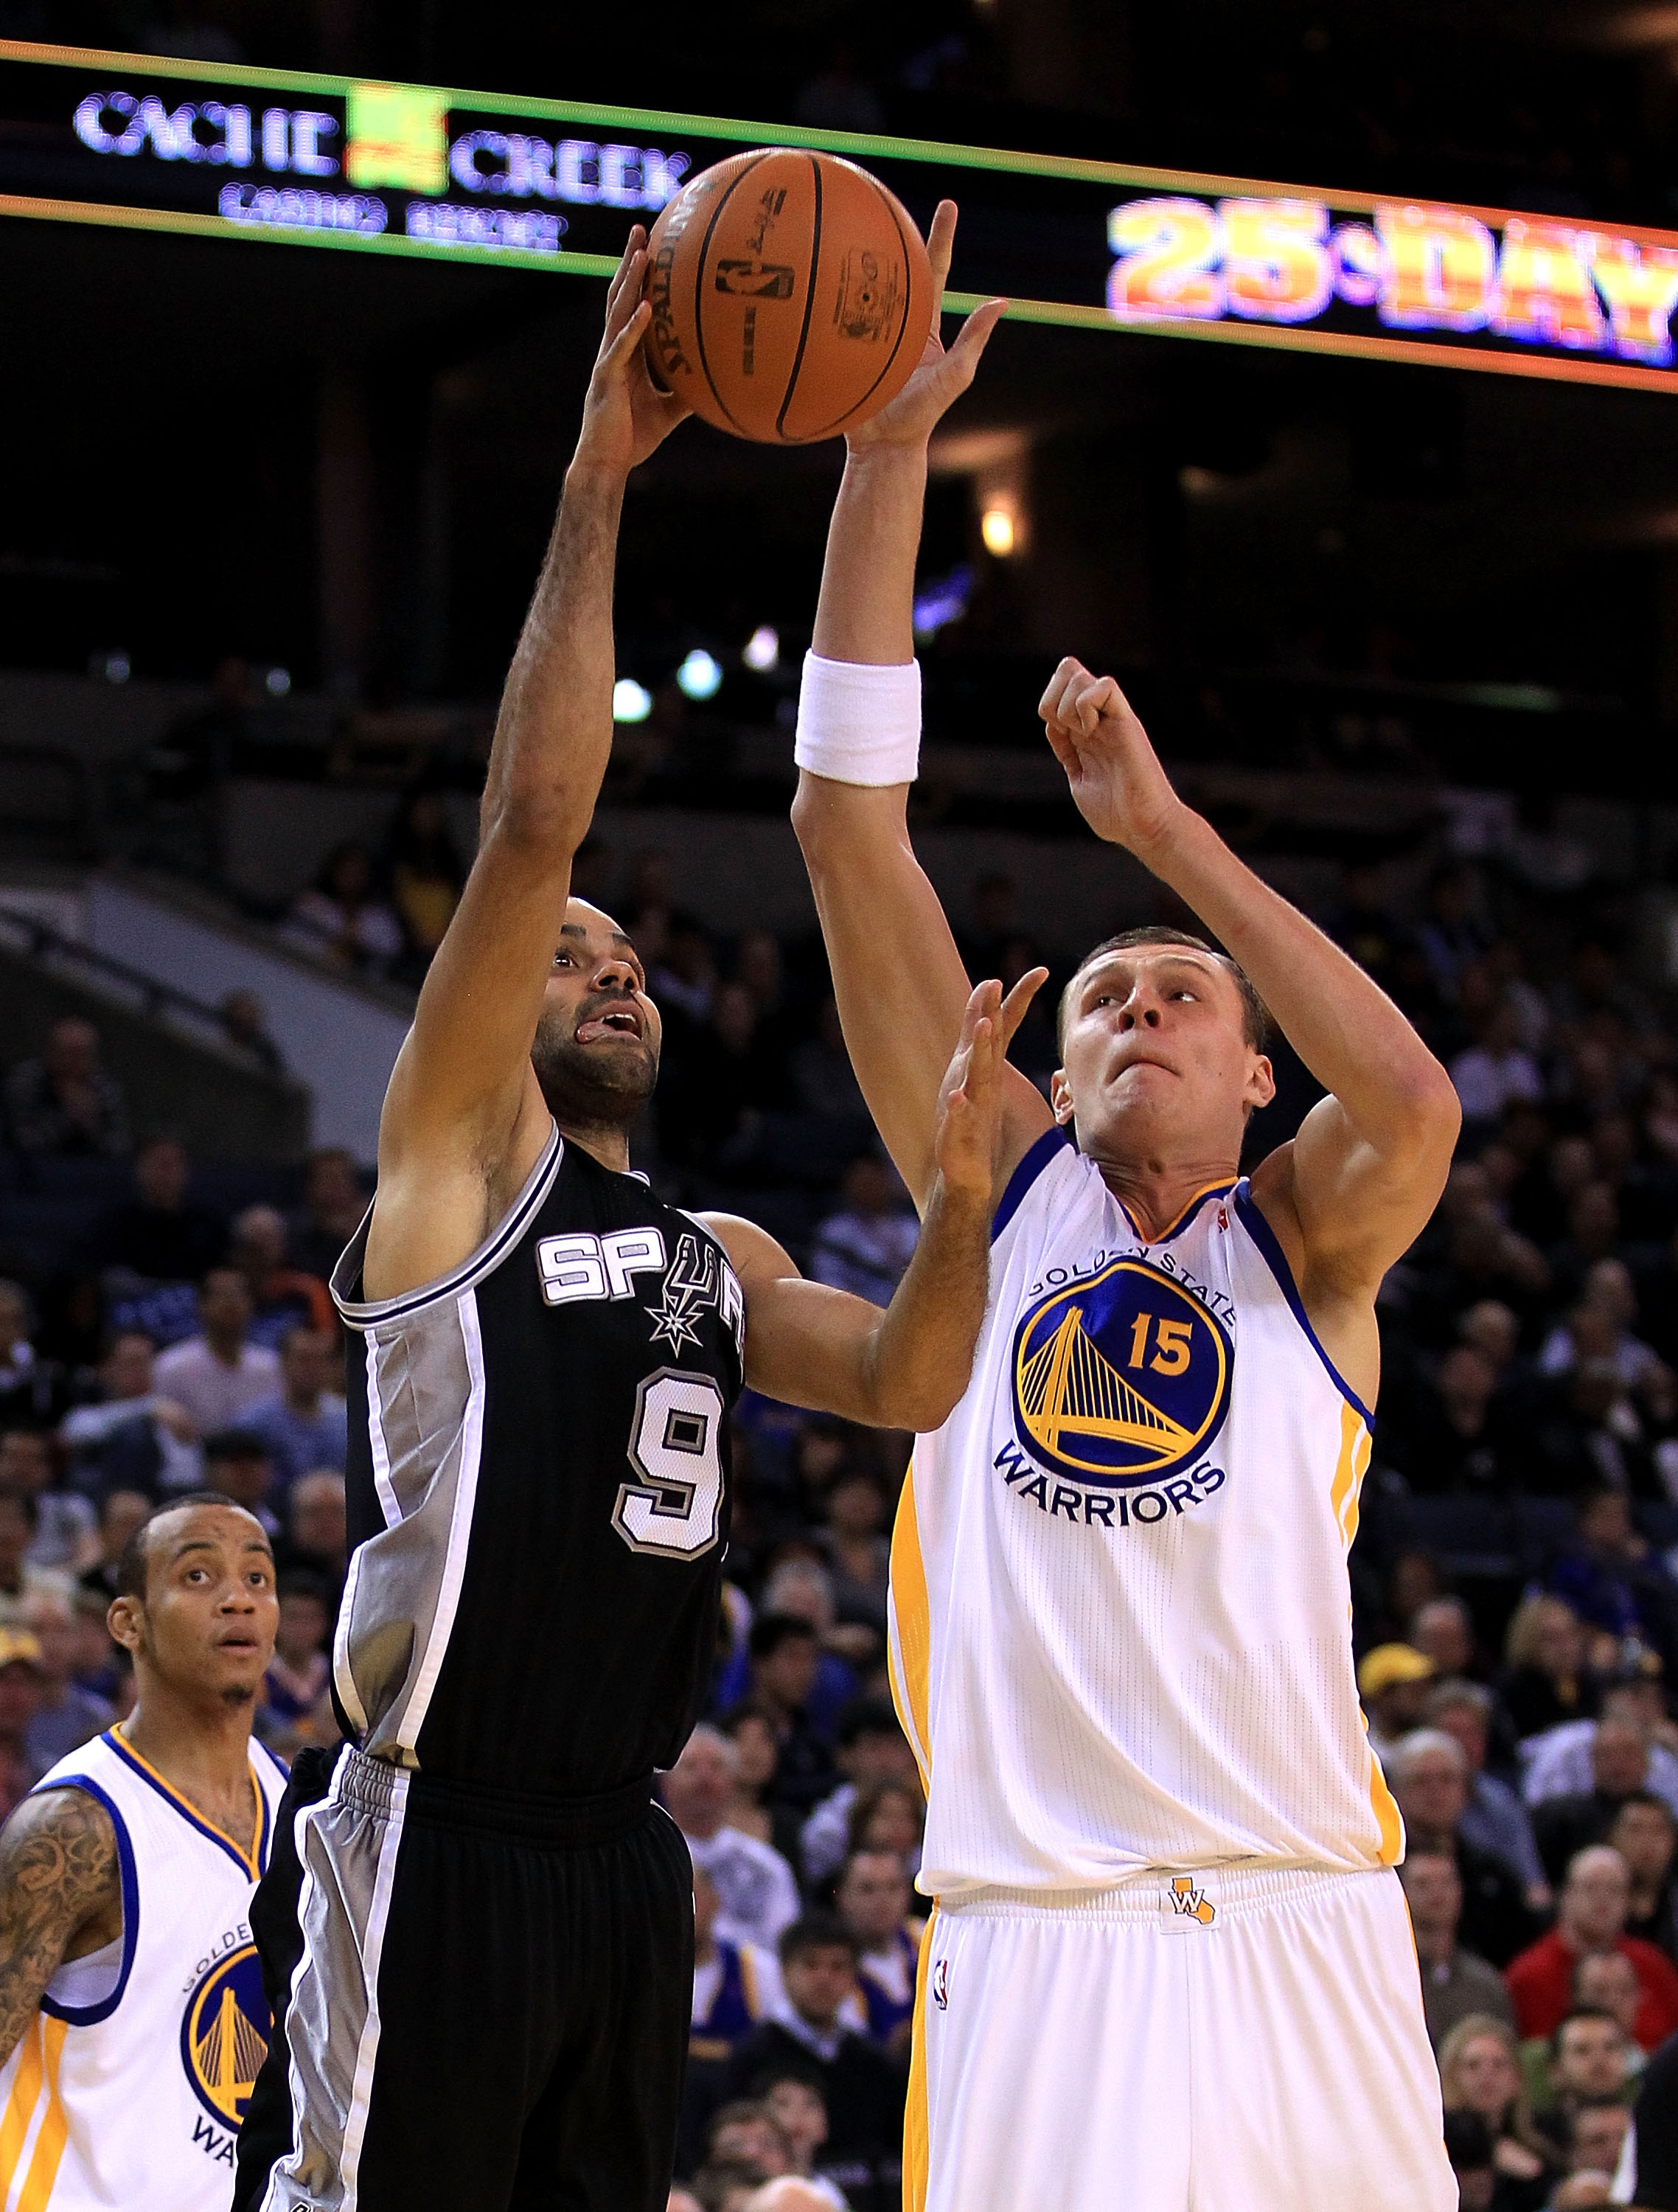 OAKLAND, CA - JANUARY 24:  Tony Parker #9 of the San Antonio Spurs goes up for a shot against Andris Biedrins #15 of the Golden State Warriors at Oracle Arena on January 24, 2011 in Oakland, California.  NOTE TO USER: User expressly acknowledges and agree